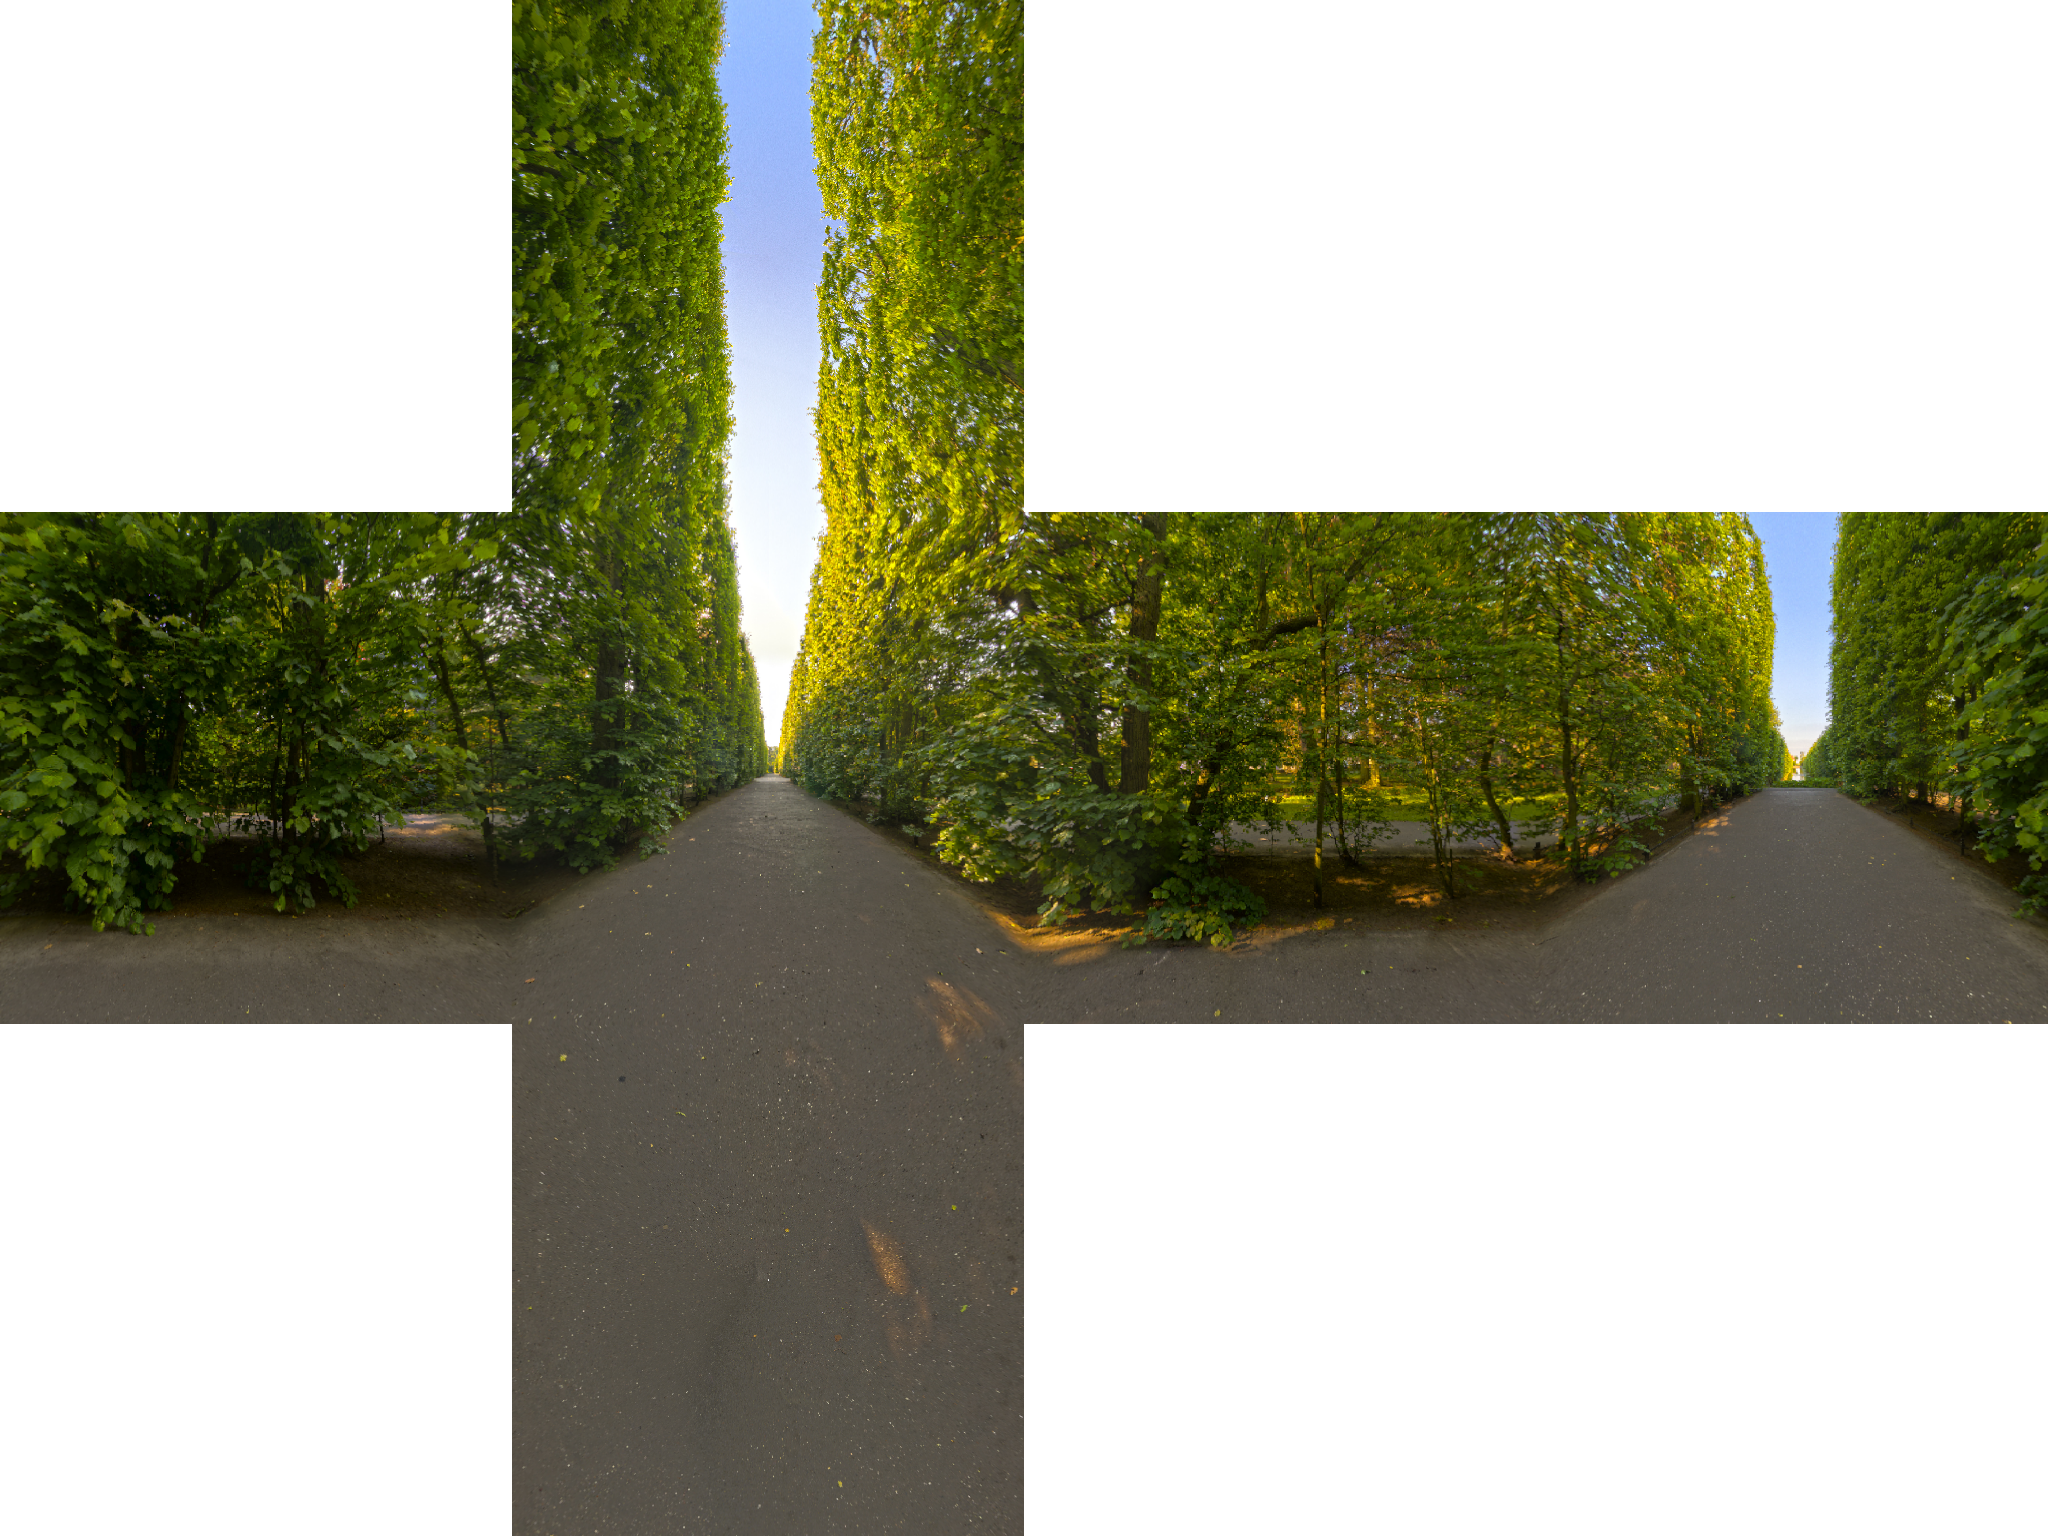 automated-tests/resources/forest_specular_cubemap.png